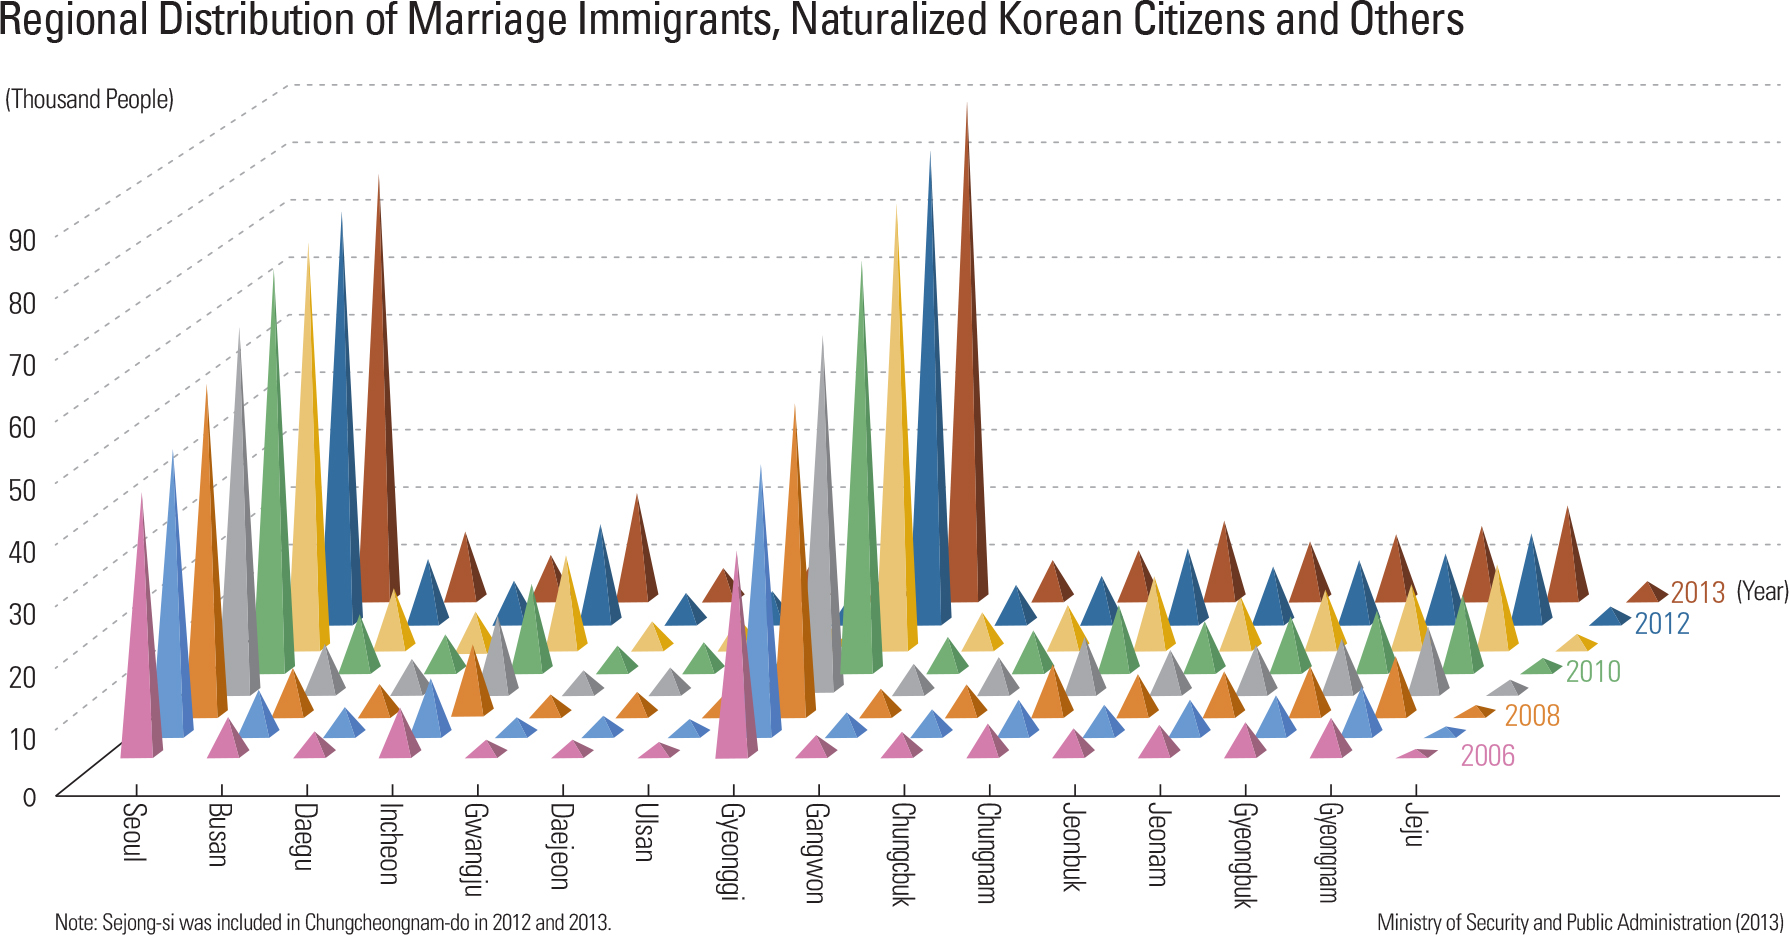 Regional Distribution of Marriage Immigrants, Naturalized Korean Citizens and Others